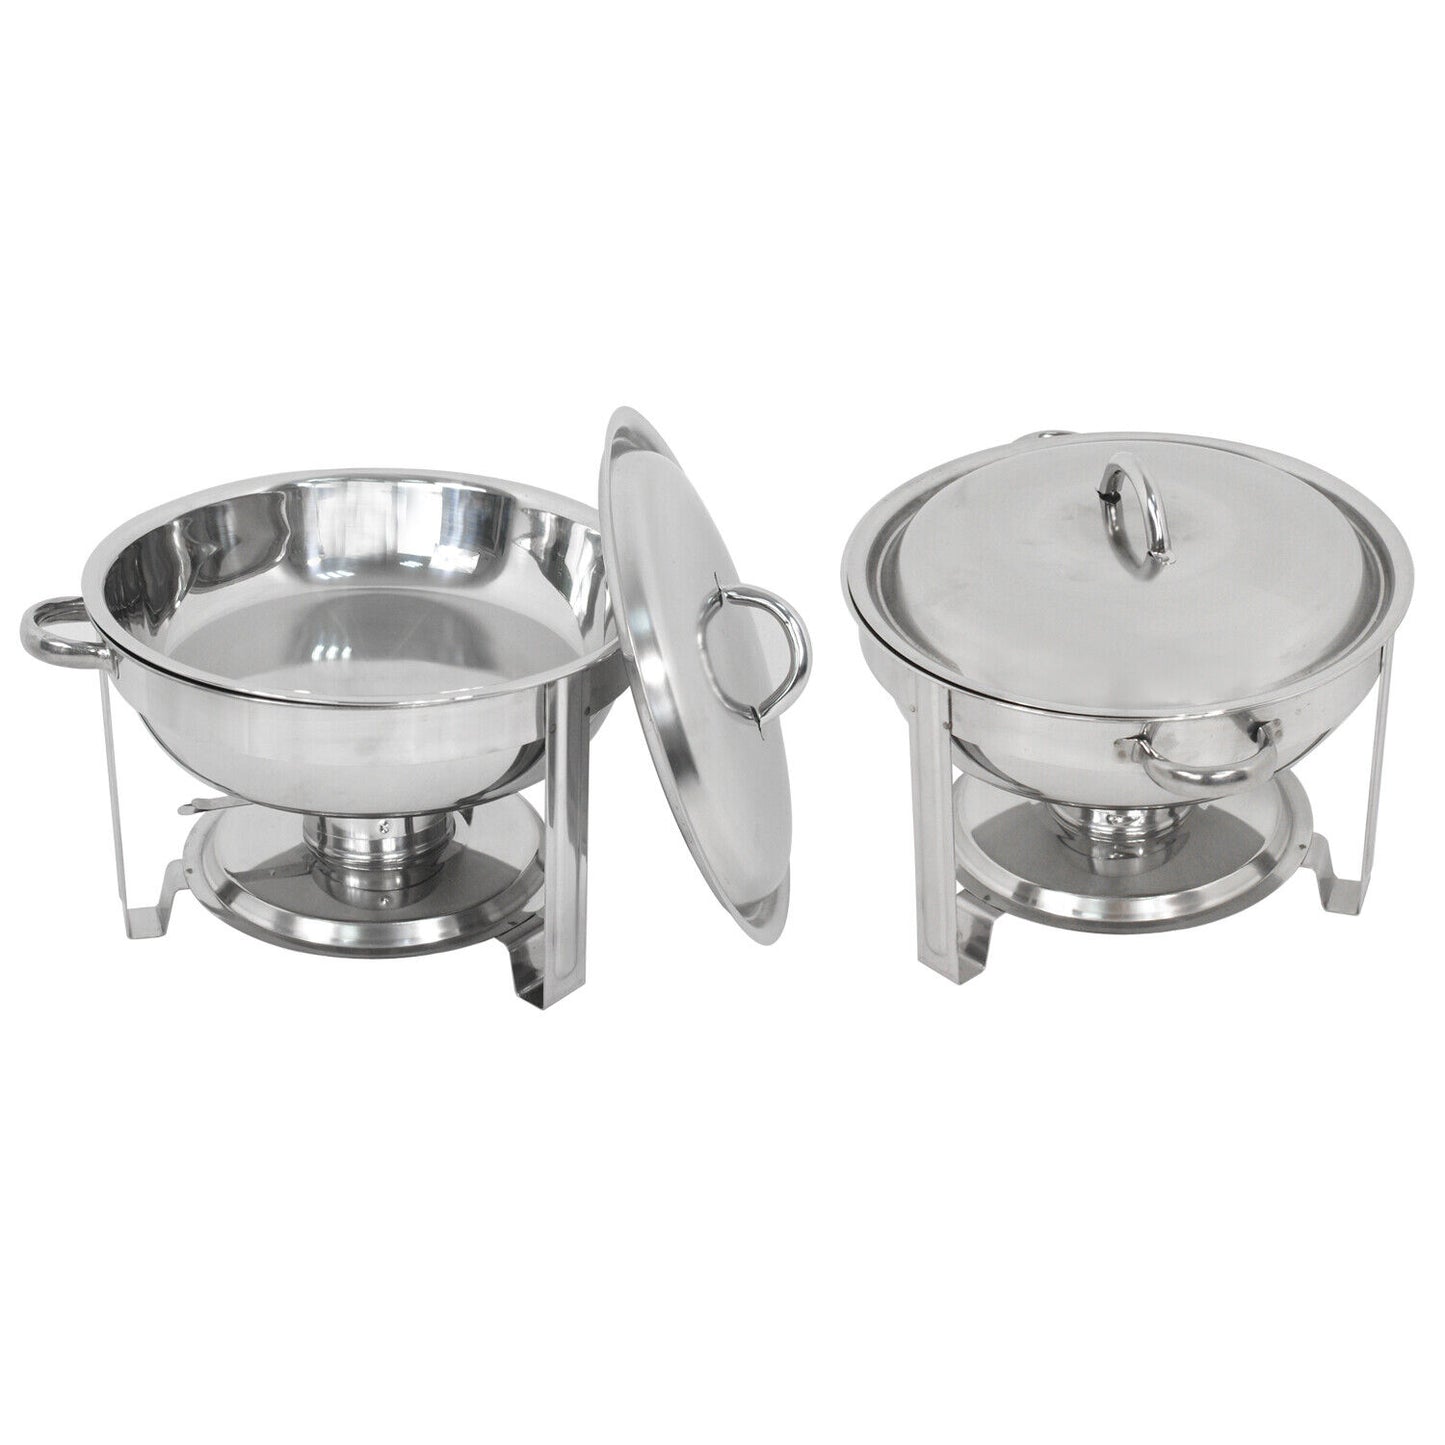 Stainless Steel 2 Round Chafing Dish+2 Rectangular Chafers w/Foldable Frame Legs